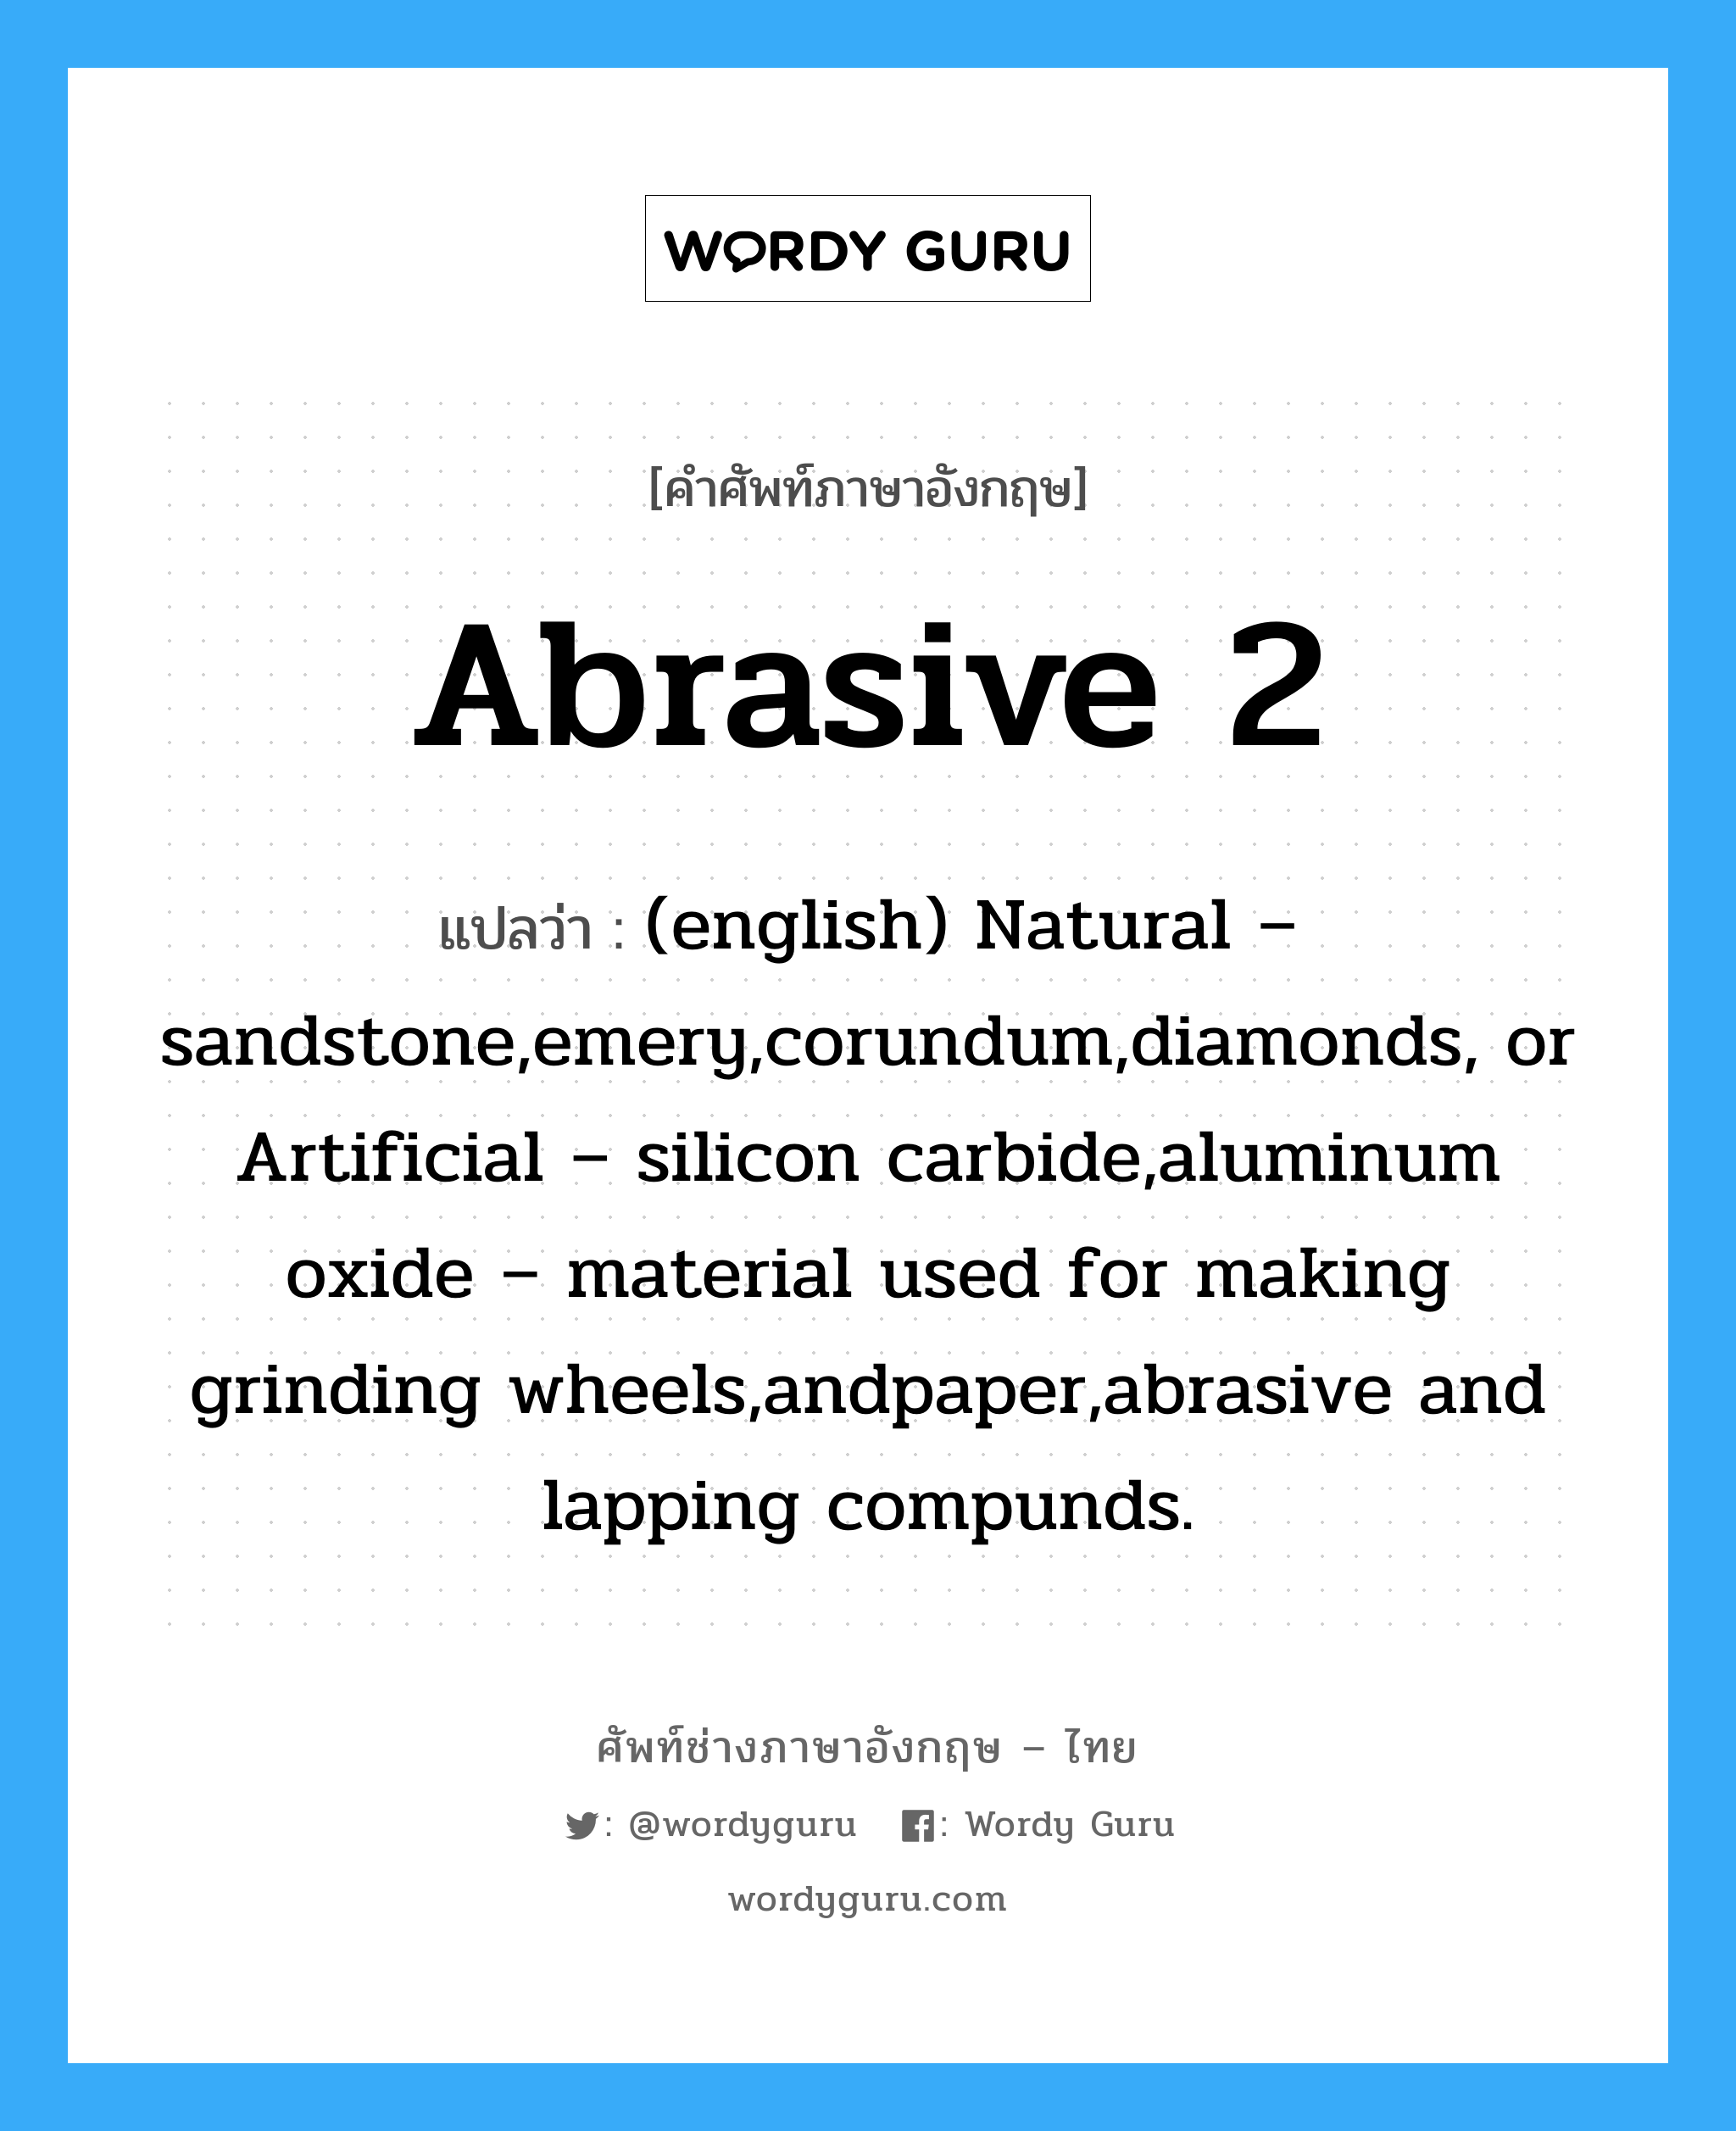 Abrasive 2 แปลว่า?, คำศัพท์ช่างภาษาอังกฤษ - ไทย Abrasive 2 คำศัพท์ภาษาอังกฤษ Abrasive 2 แปลว่า (english) Natural – sandstone,emery,corundum,diamonds, or Artificial – silicon carbide,aluminum oxide – material used for making grinding wheels,andpaper,abrasive and lapping compunds.